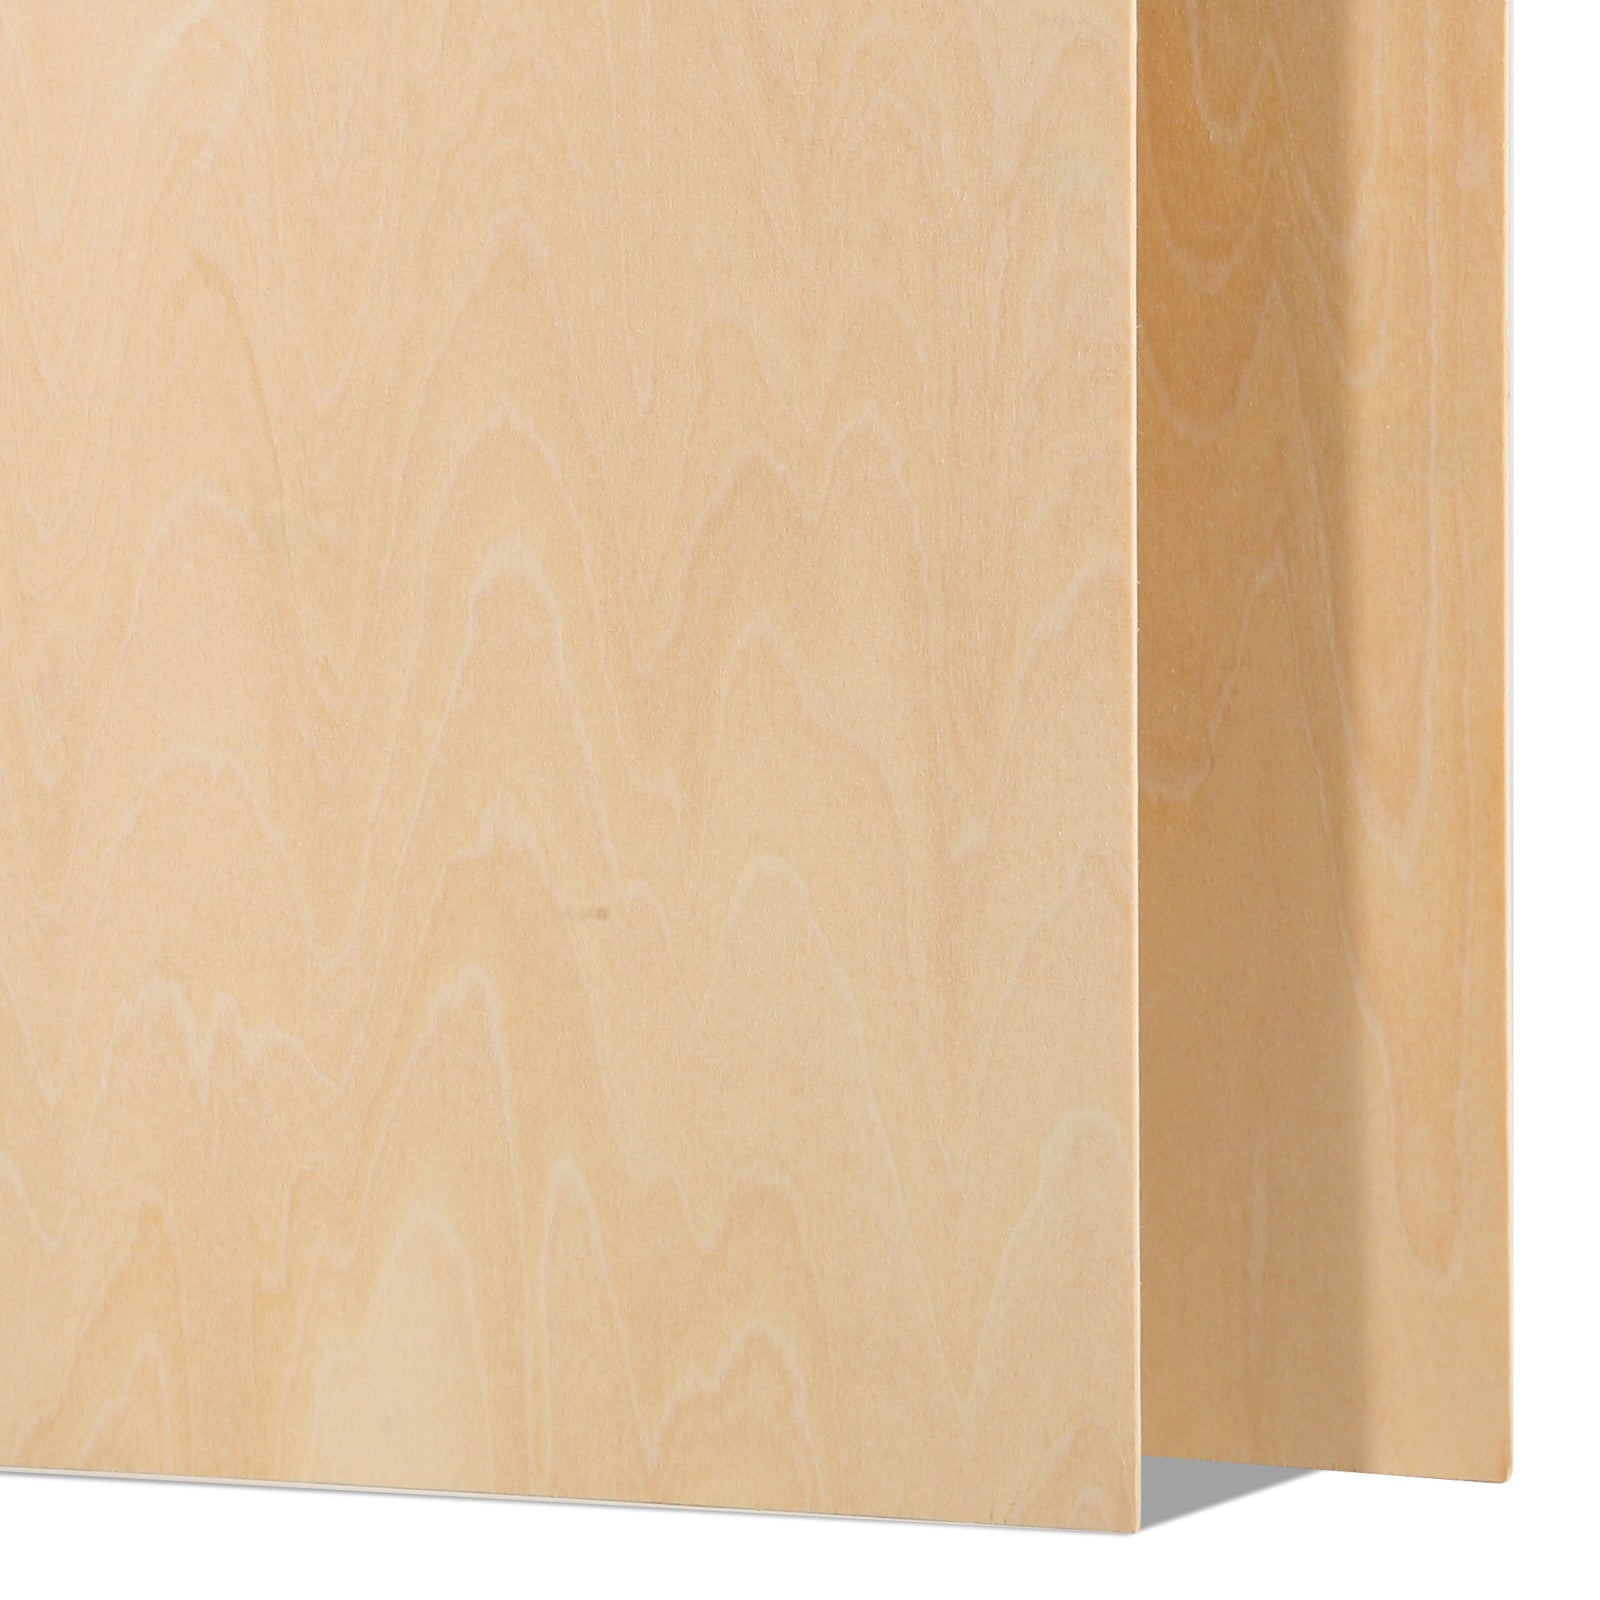 A4 Plywood Sheets 3mm Thickness (+/- 0.2mm) Basswood Plywood 11.8x11.8